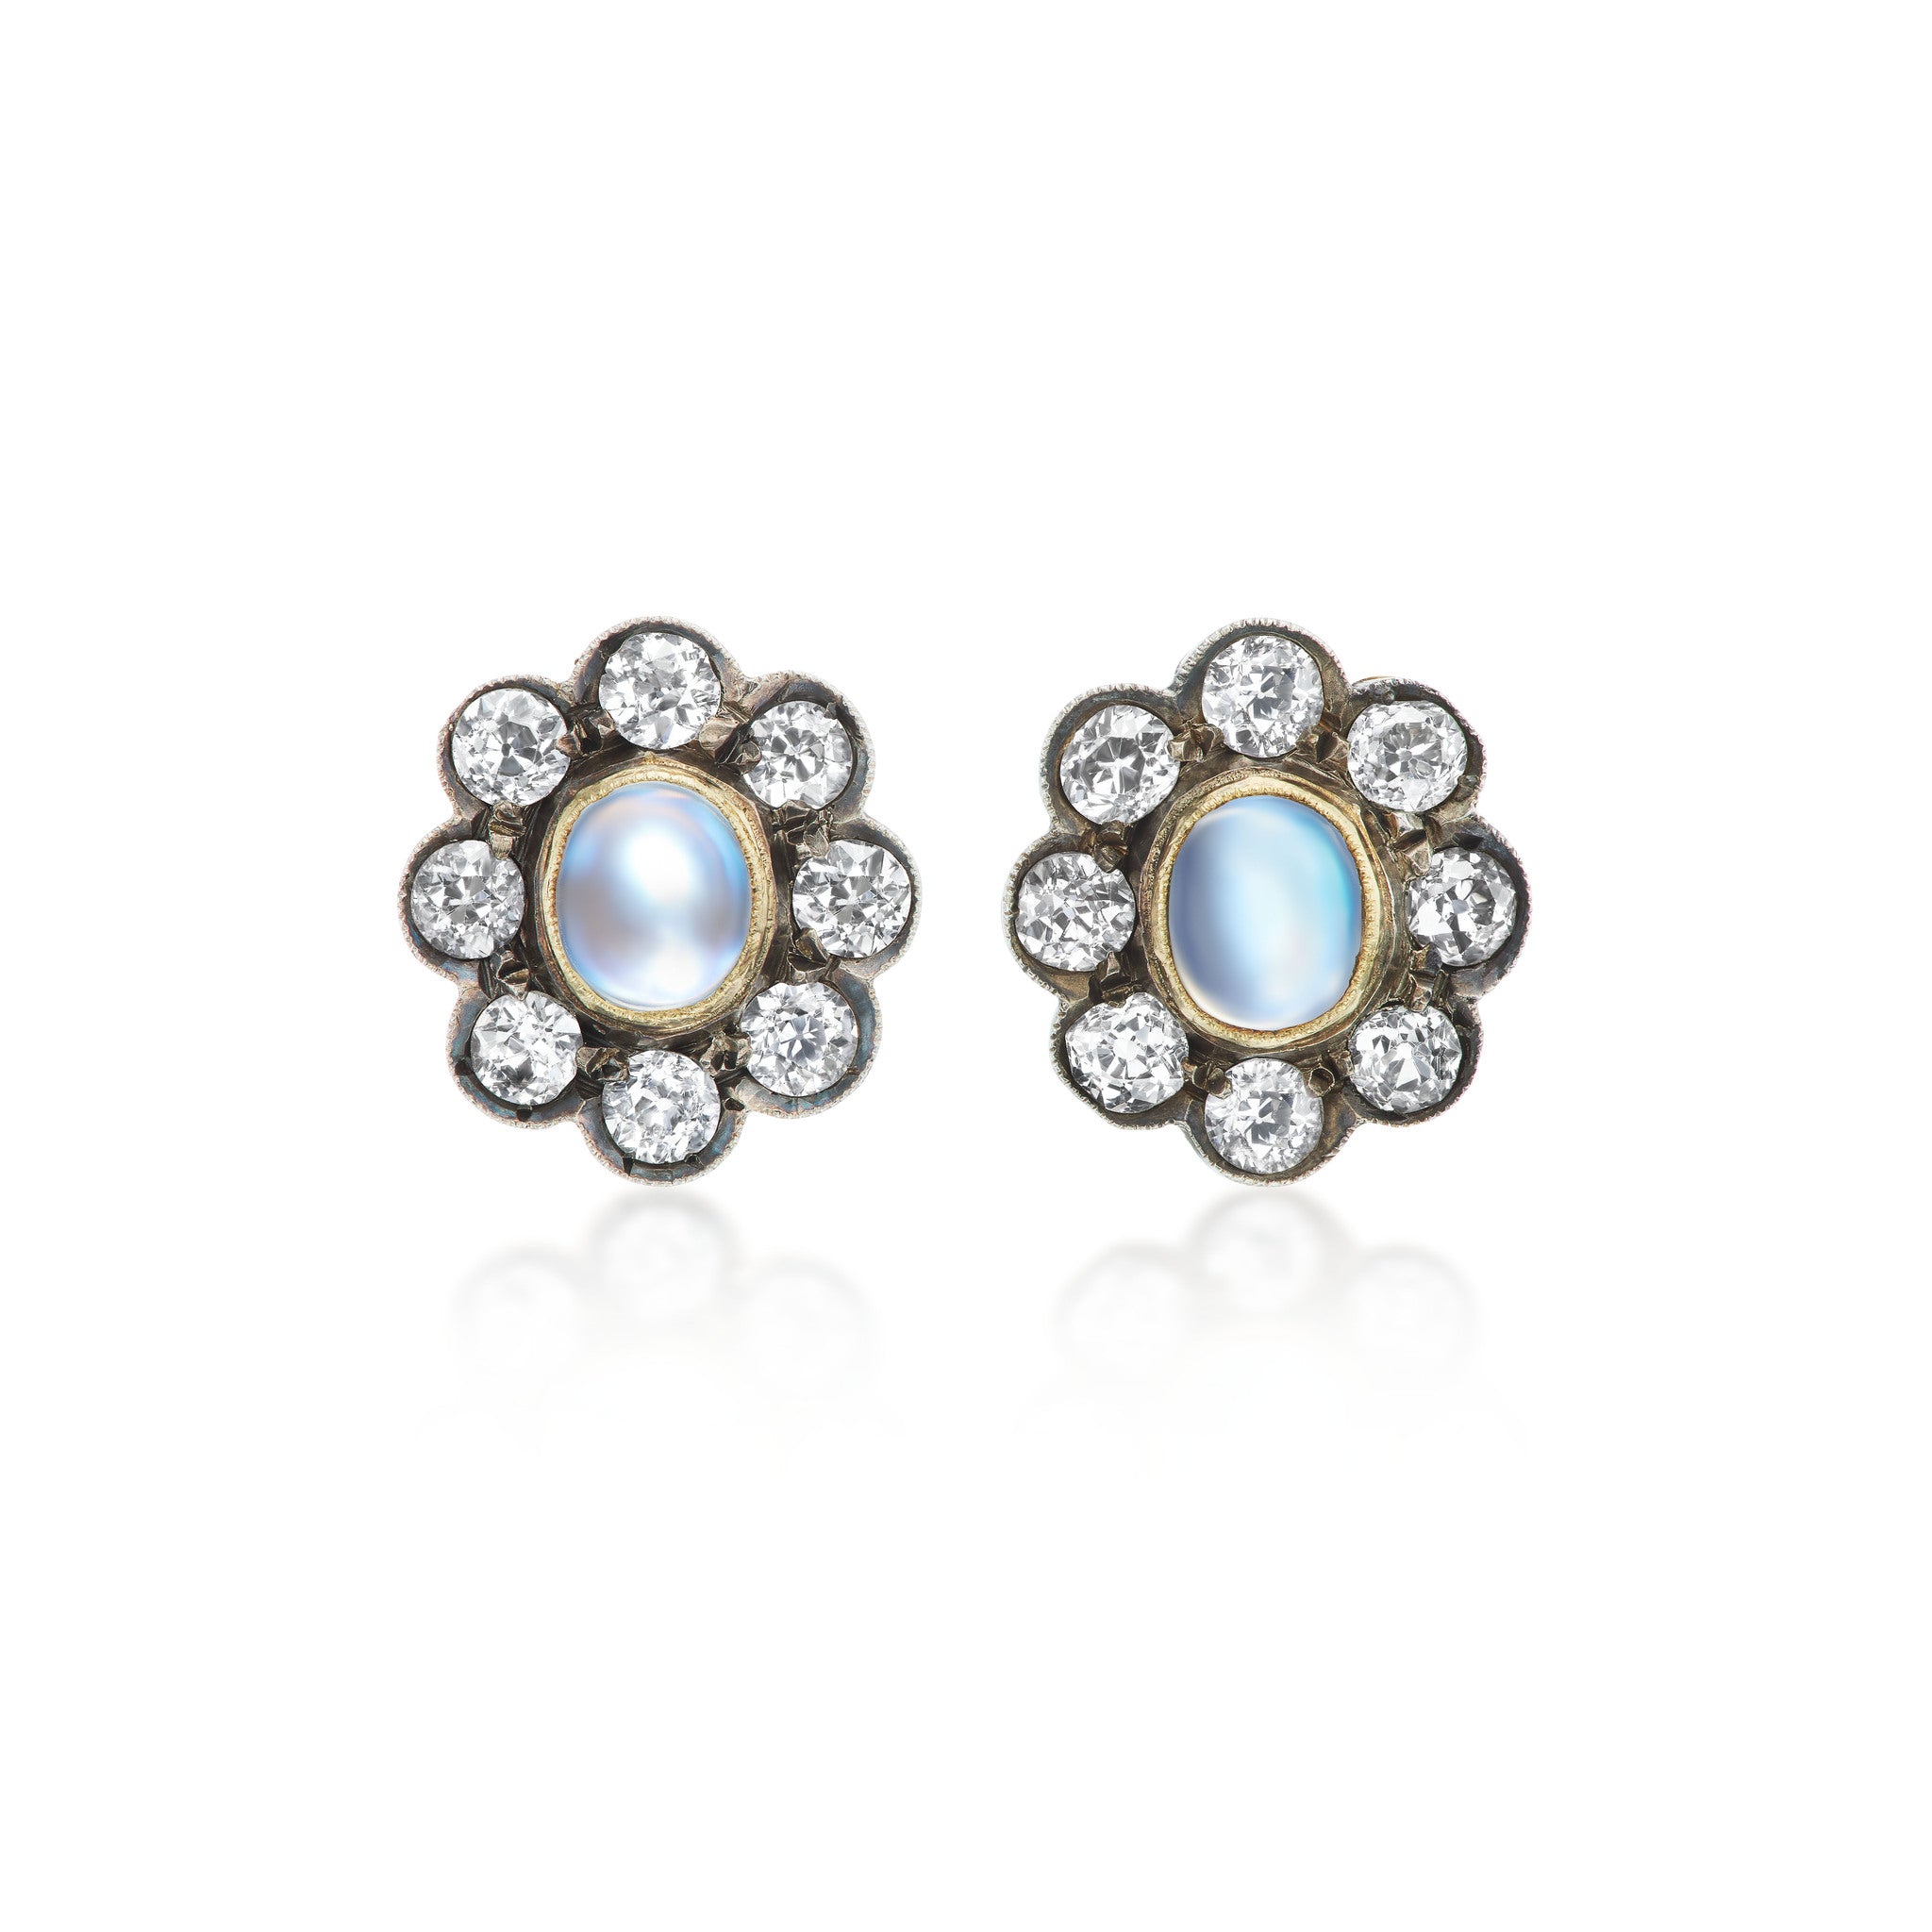 Antique earrings featuring lively bezel-set moonstones, with old mine-cut diamonds in a halo surround, set in silver topped gold.